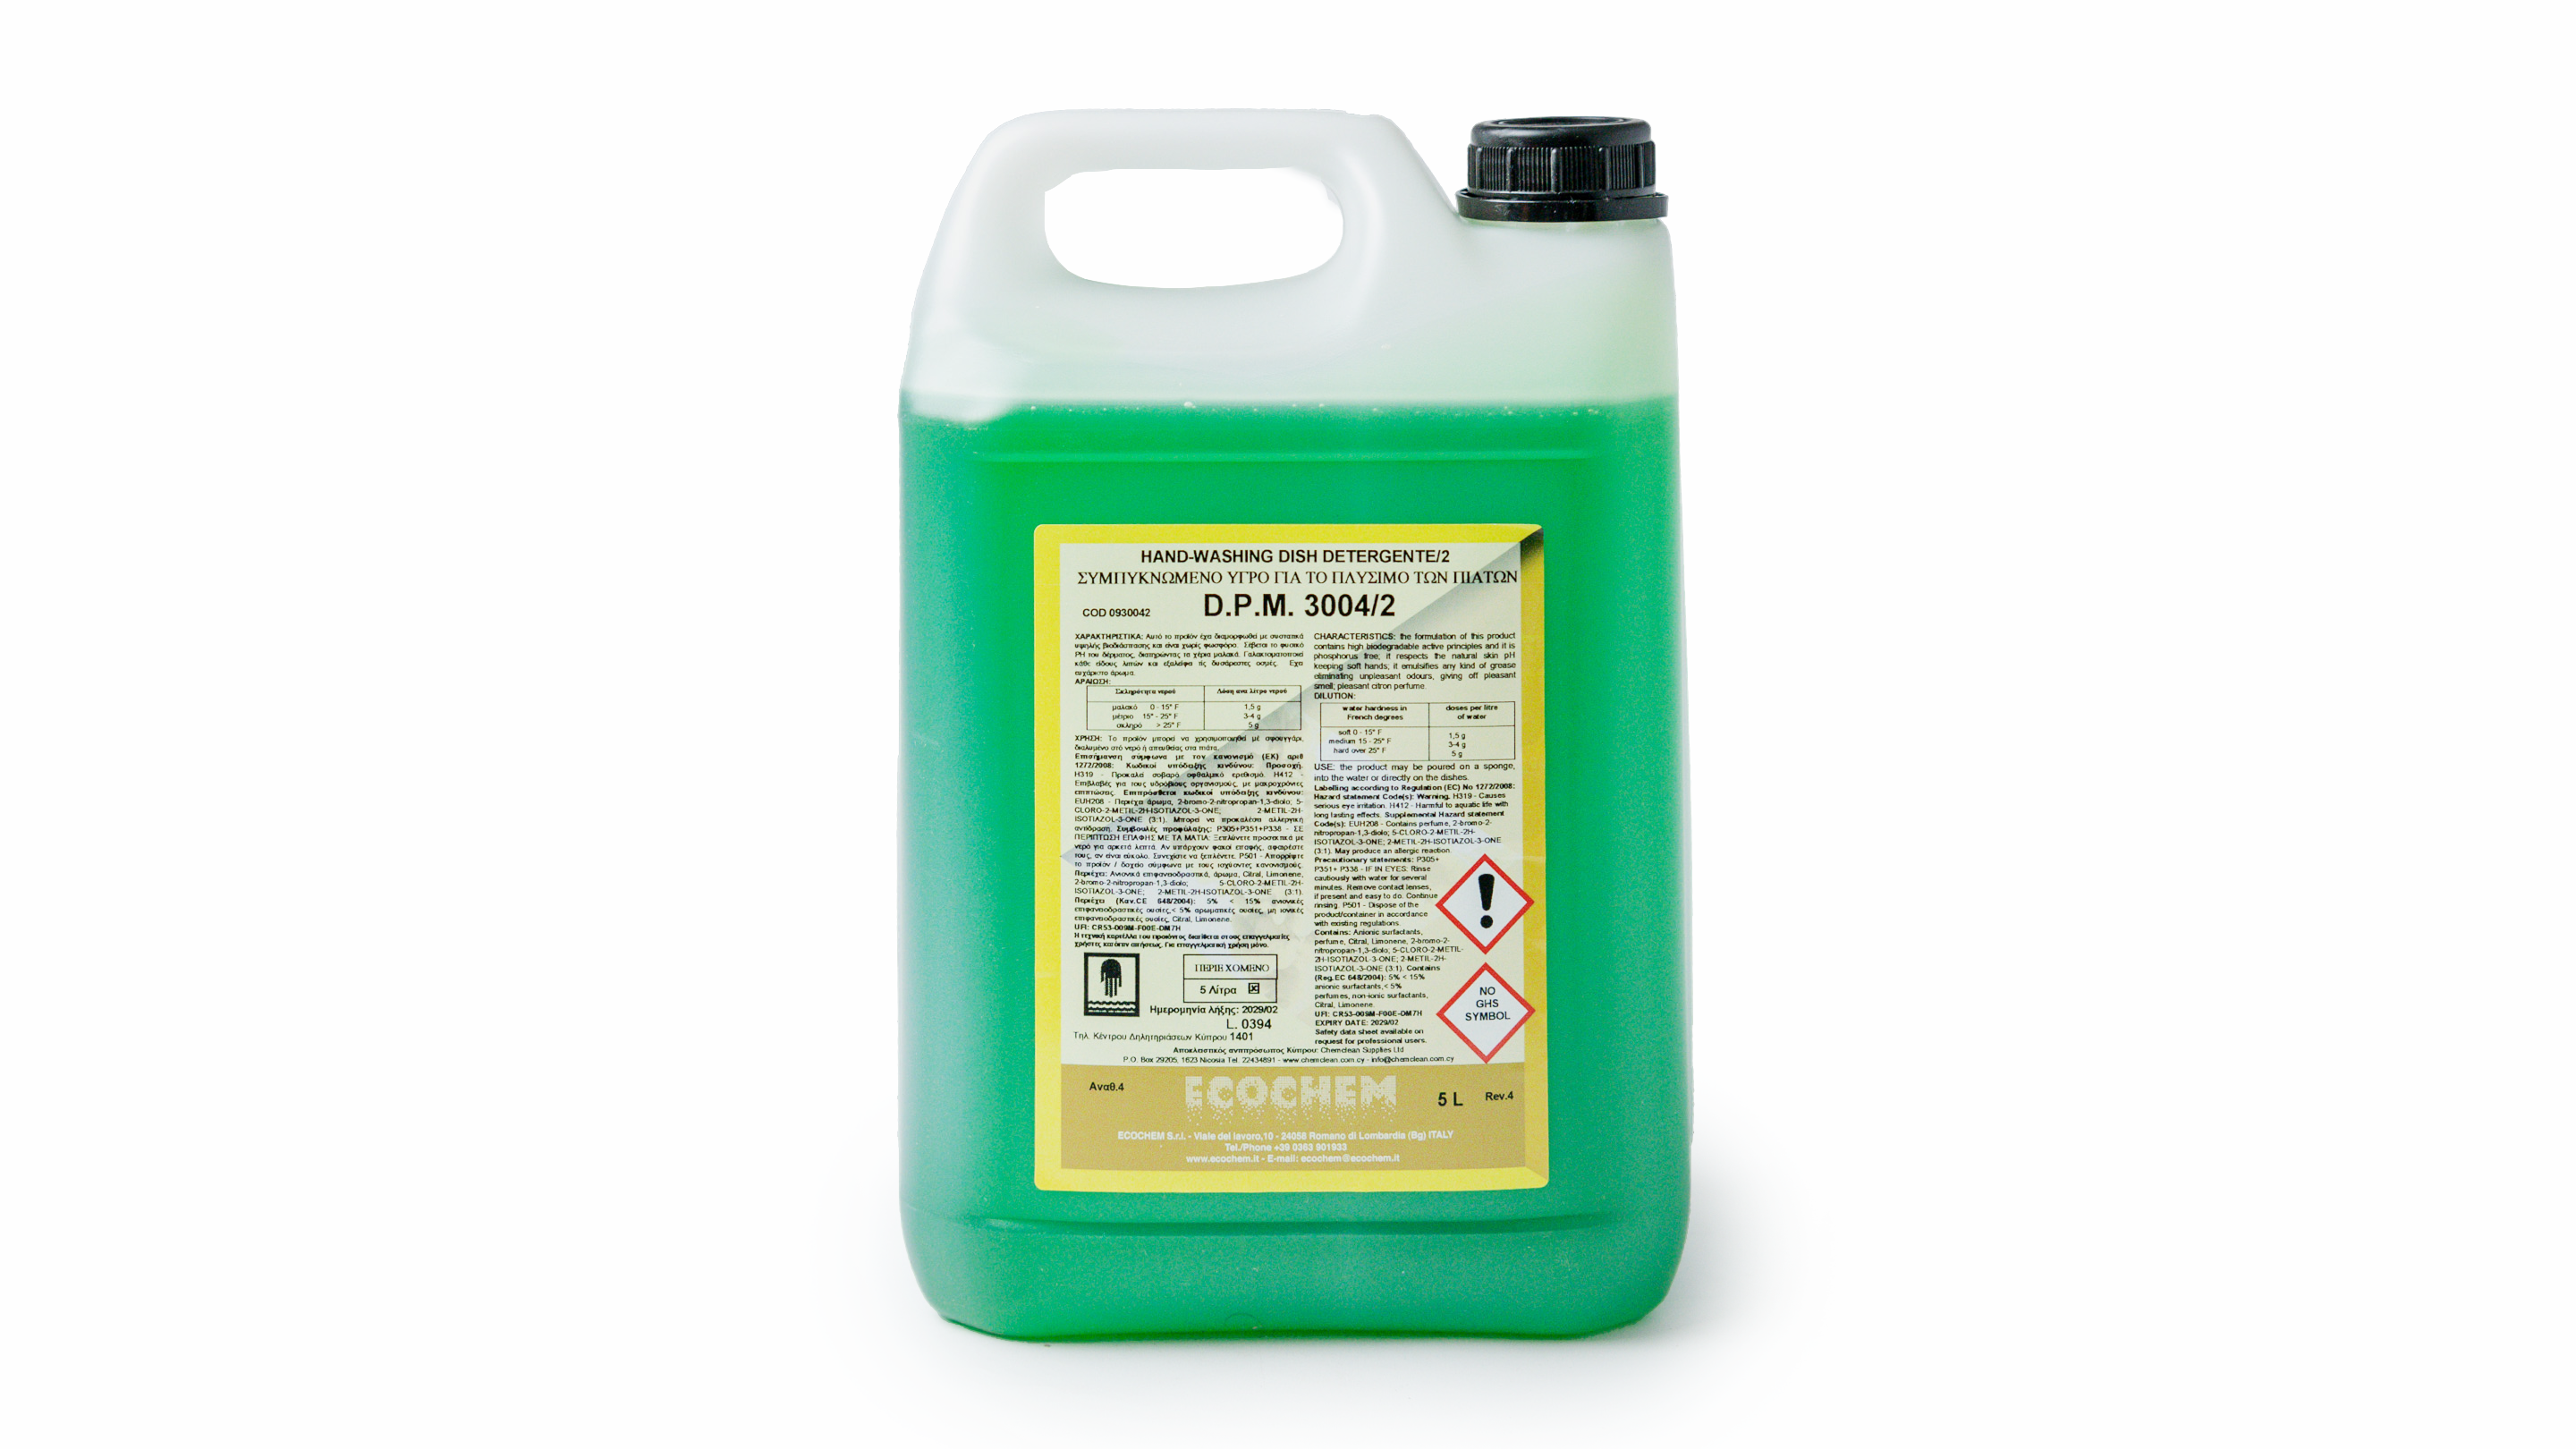 A photo of Hand washing dish detergent - 5 litre bottle of green liquid with yellow label, Echochem product offered by ChemClean supplies in Cyprus